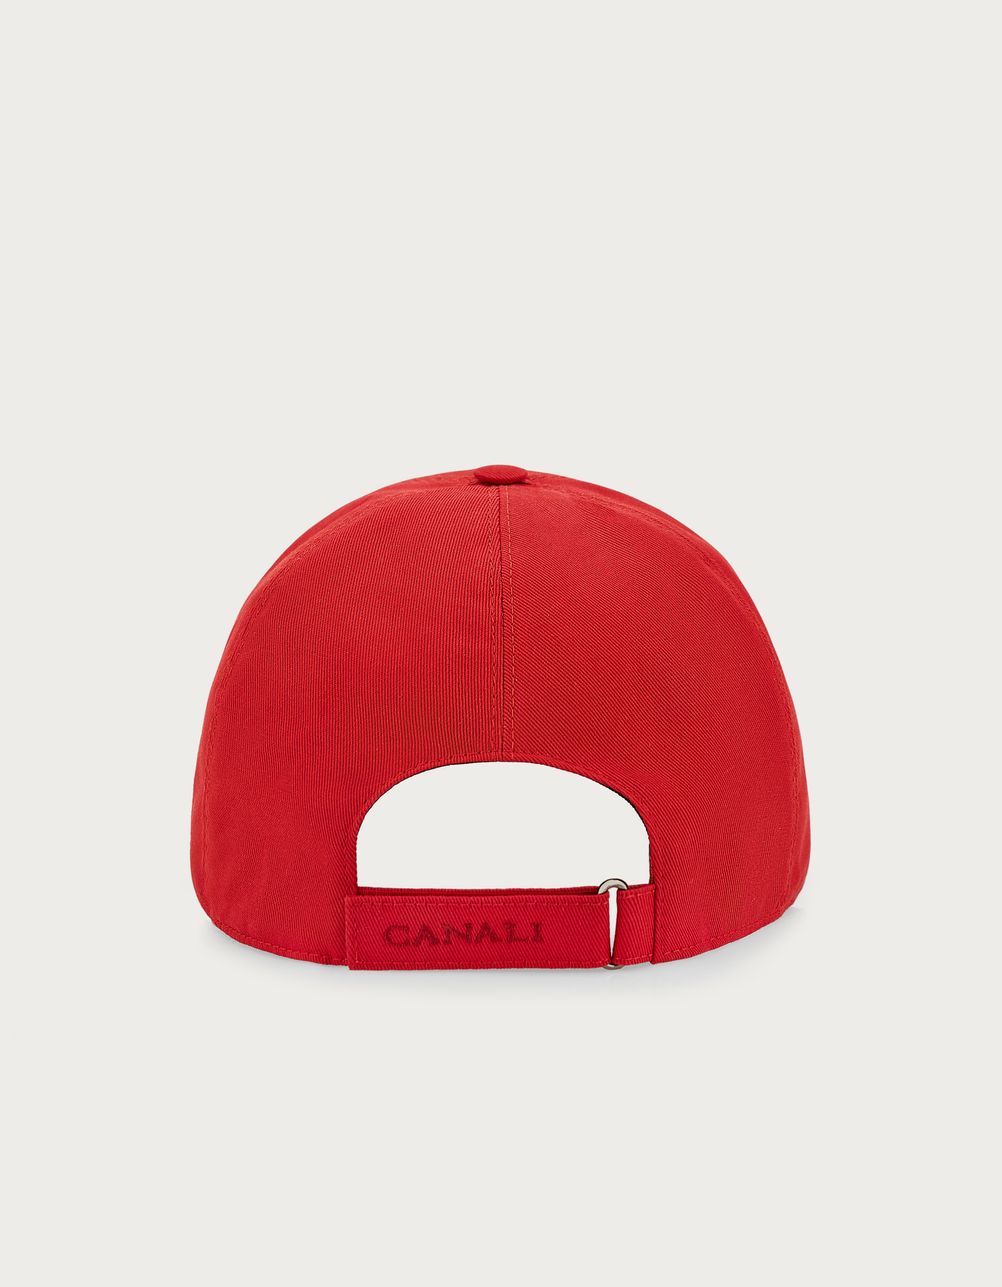 Baseball cap in red cotton